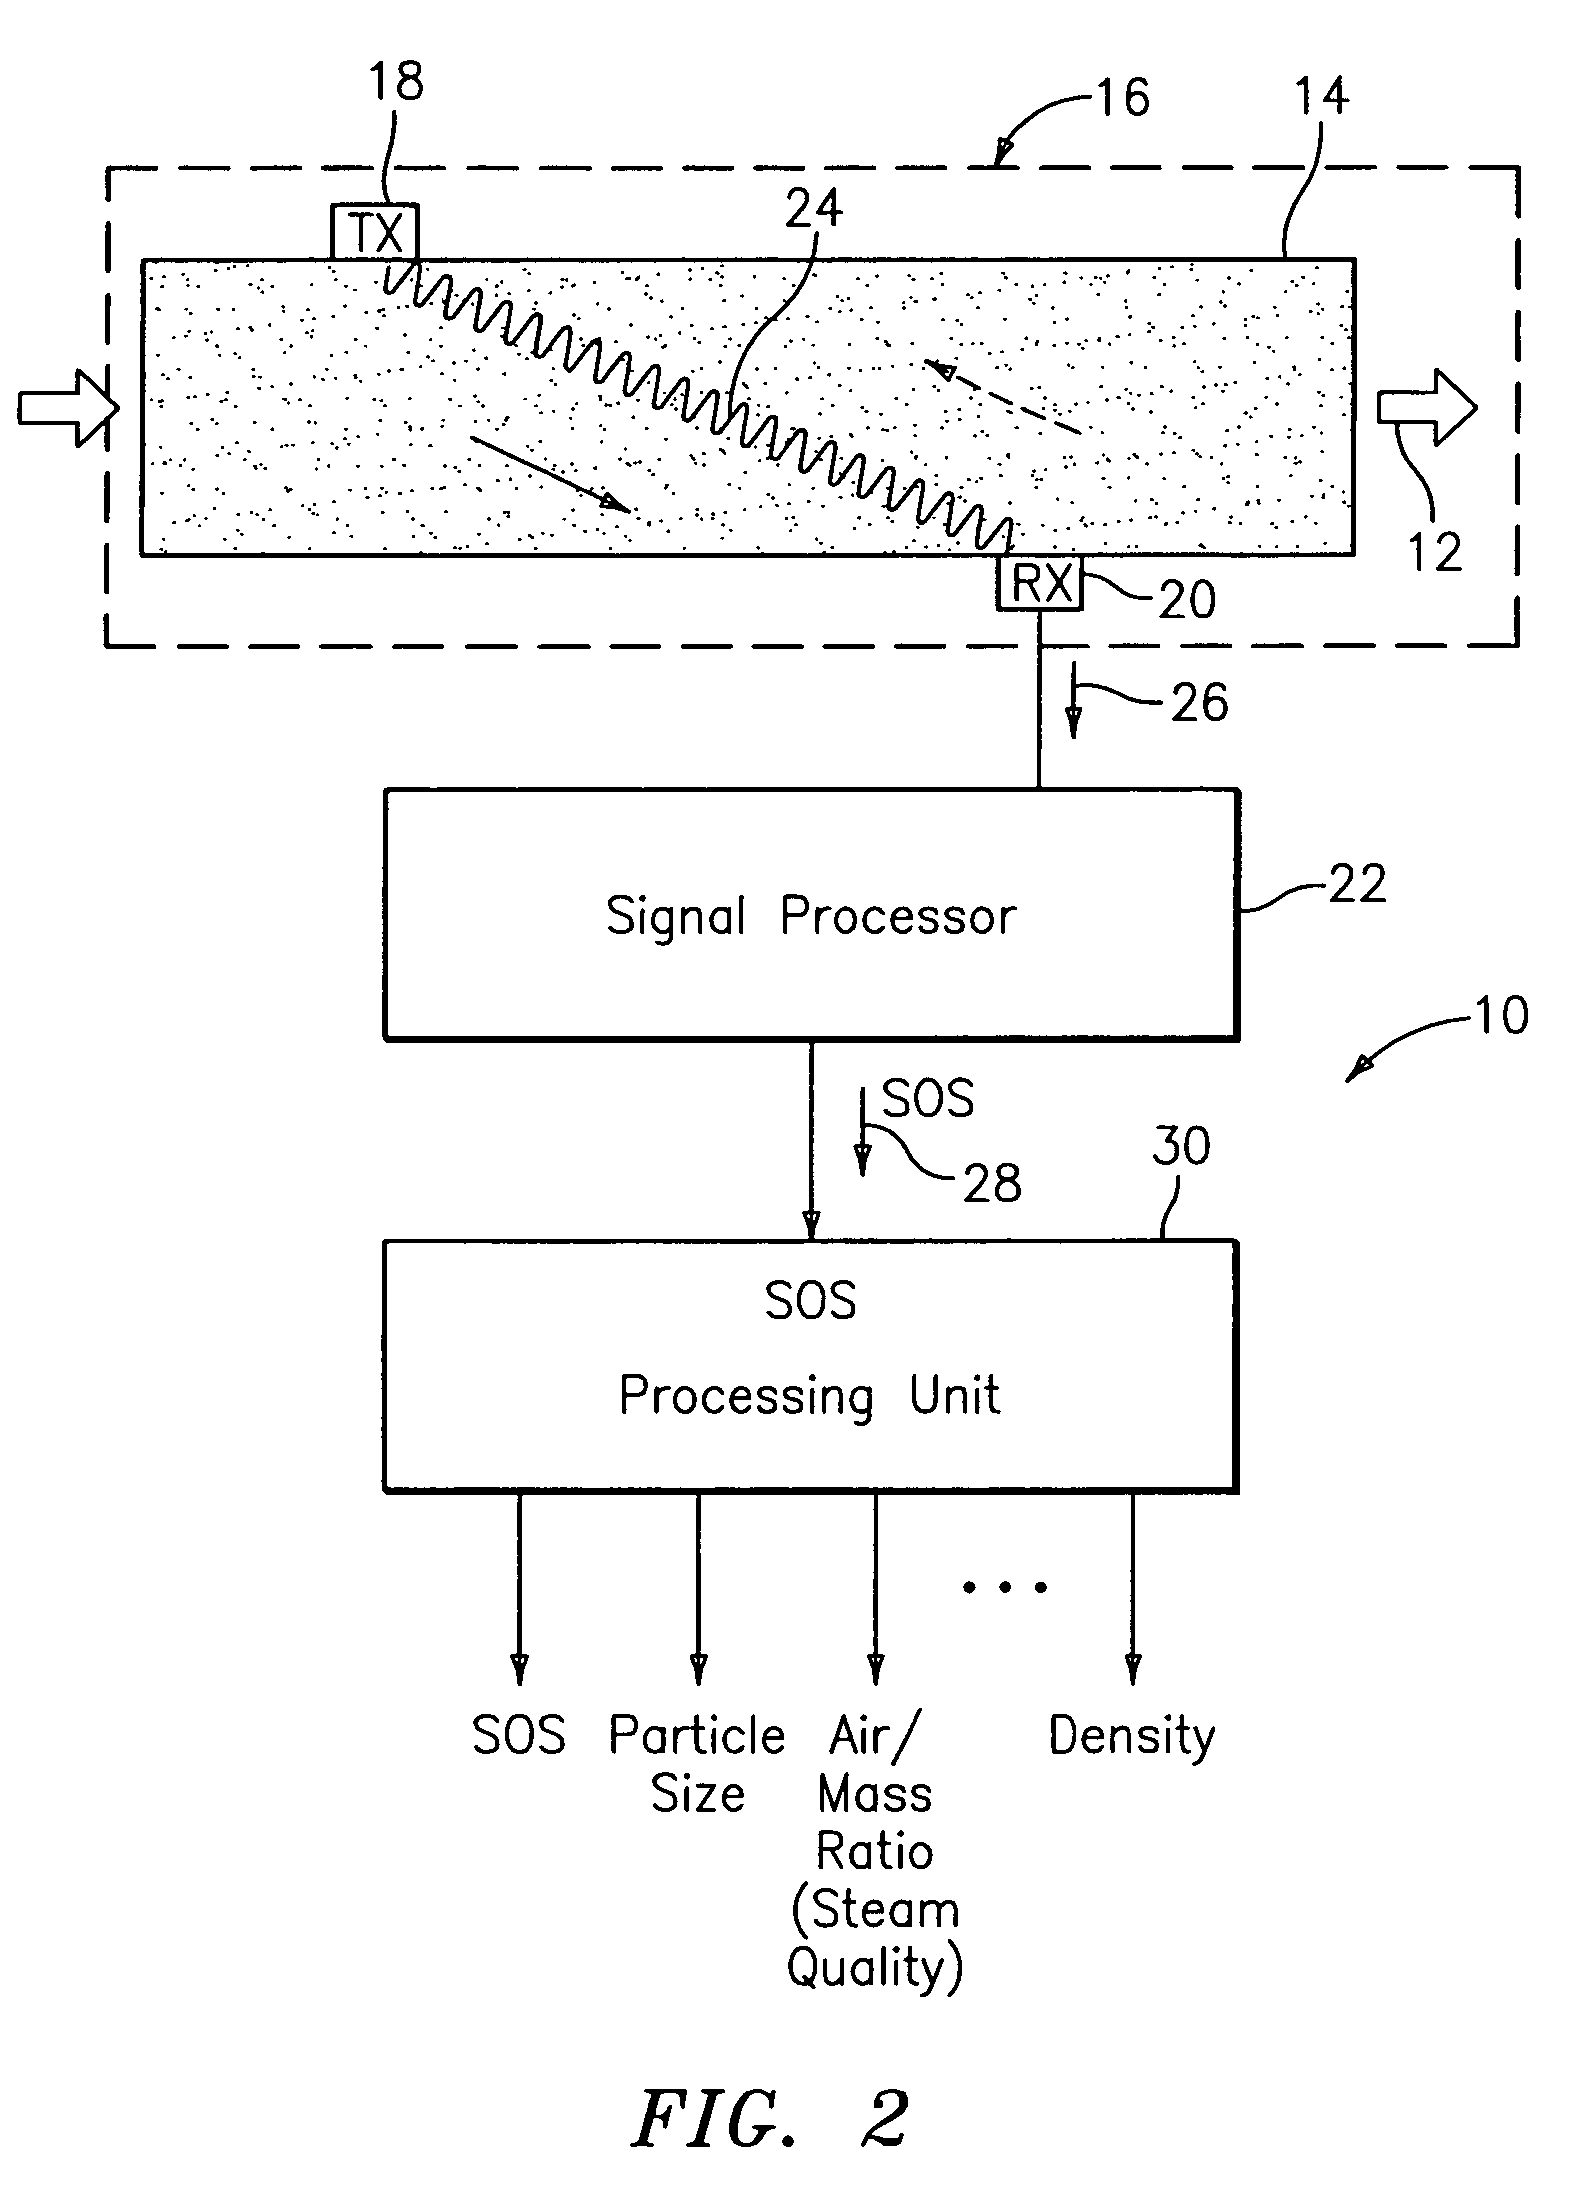 Apparatus for measuring parameters of a flowing multiphase mixture